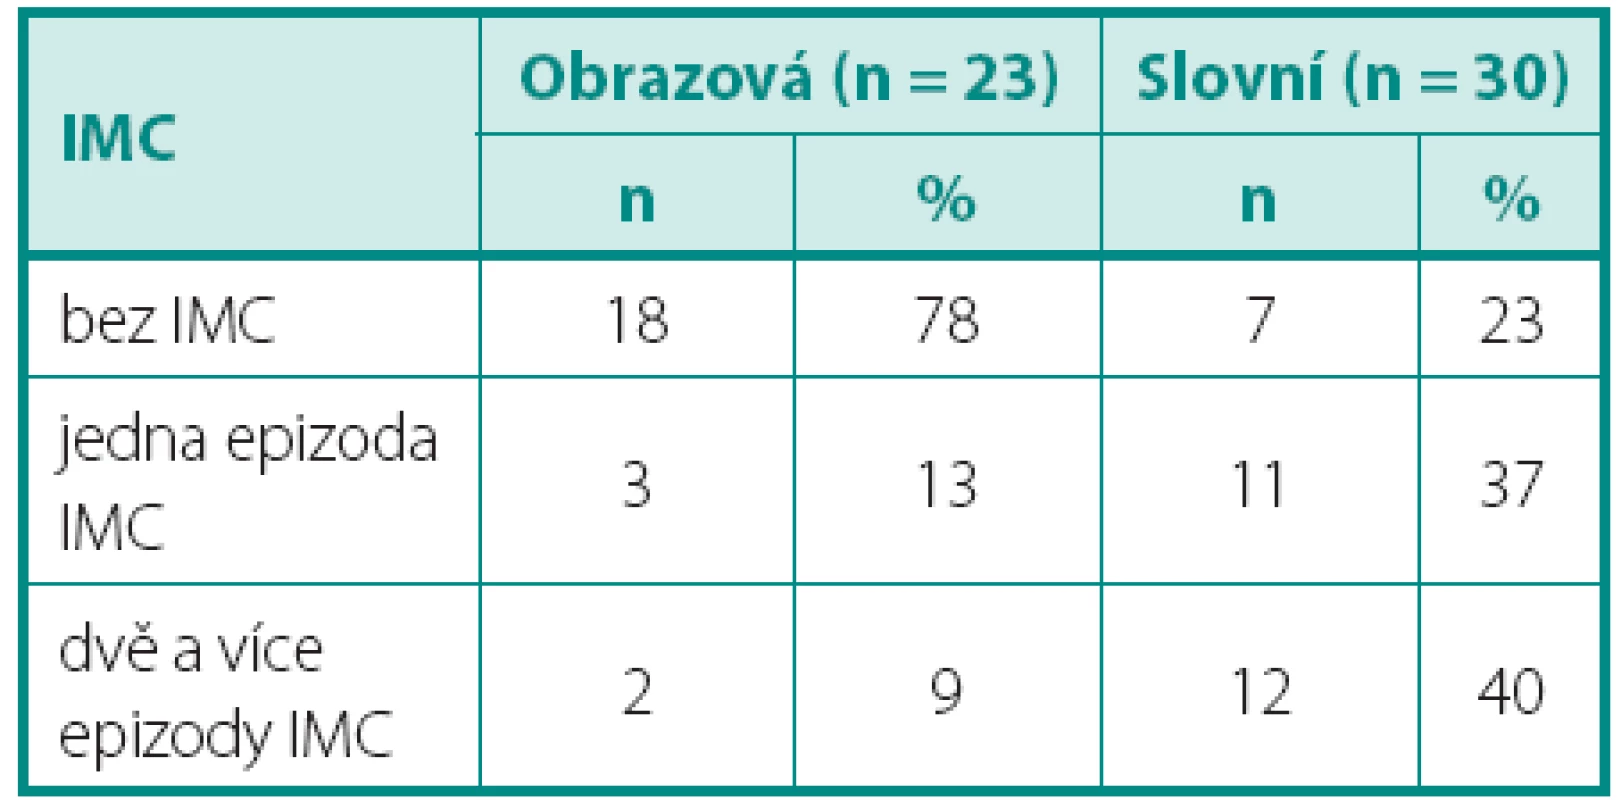 Počet epizod močové infekce u jednotlivých skupin pacientů
Table 3. The number of episodes of urinary tract infection in individual groups of patients